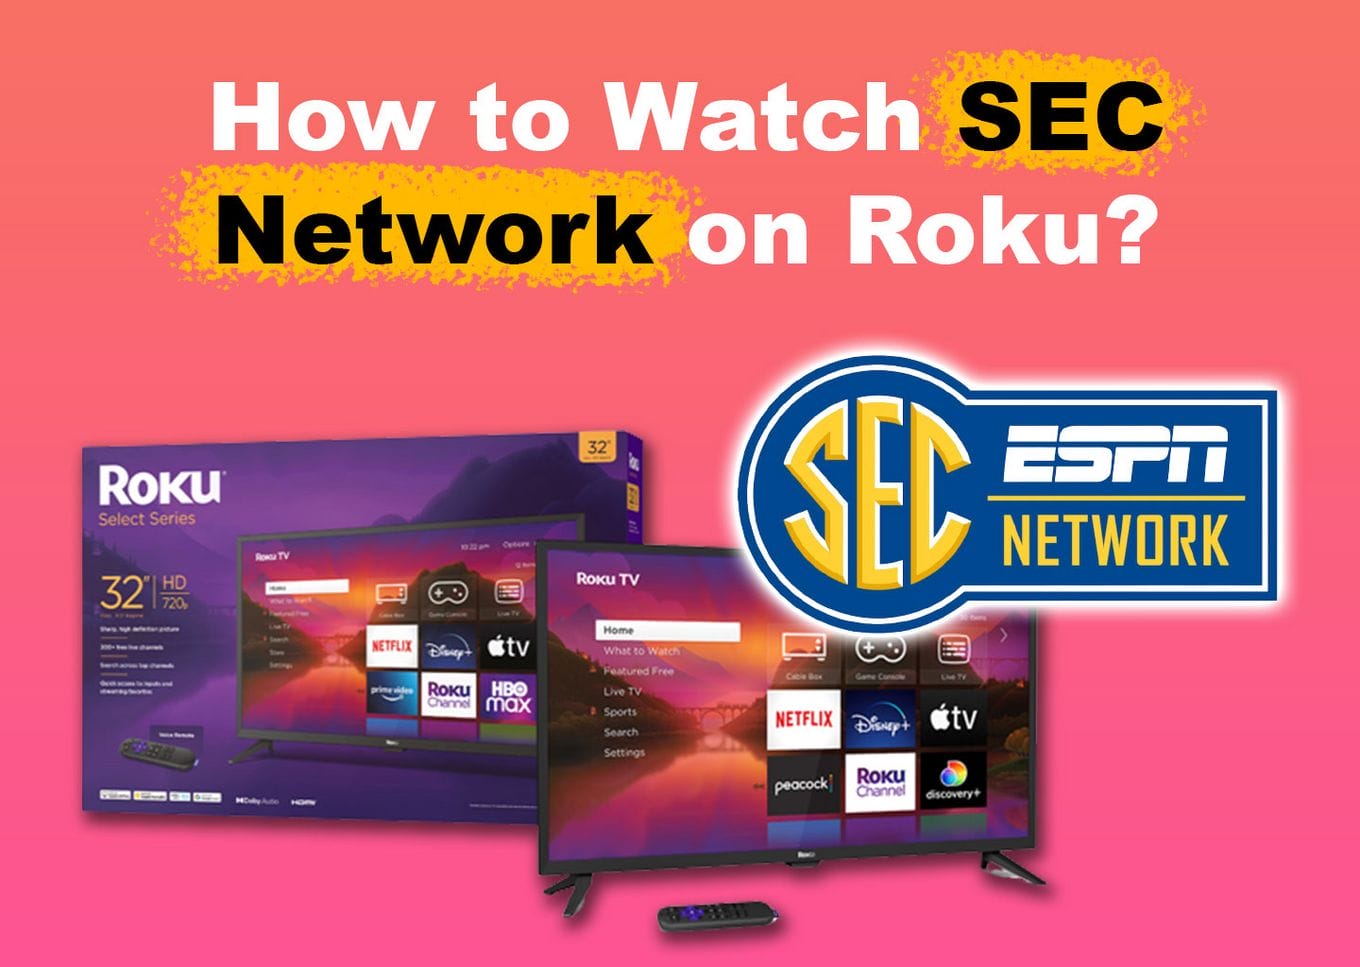 How to Watch Sec Network on Roku?